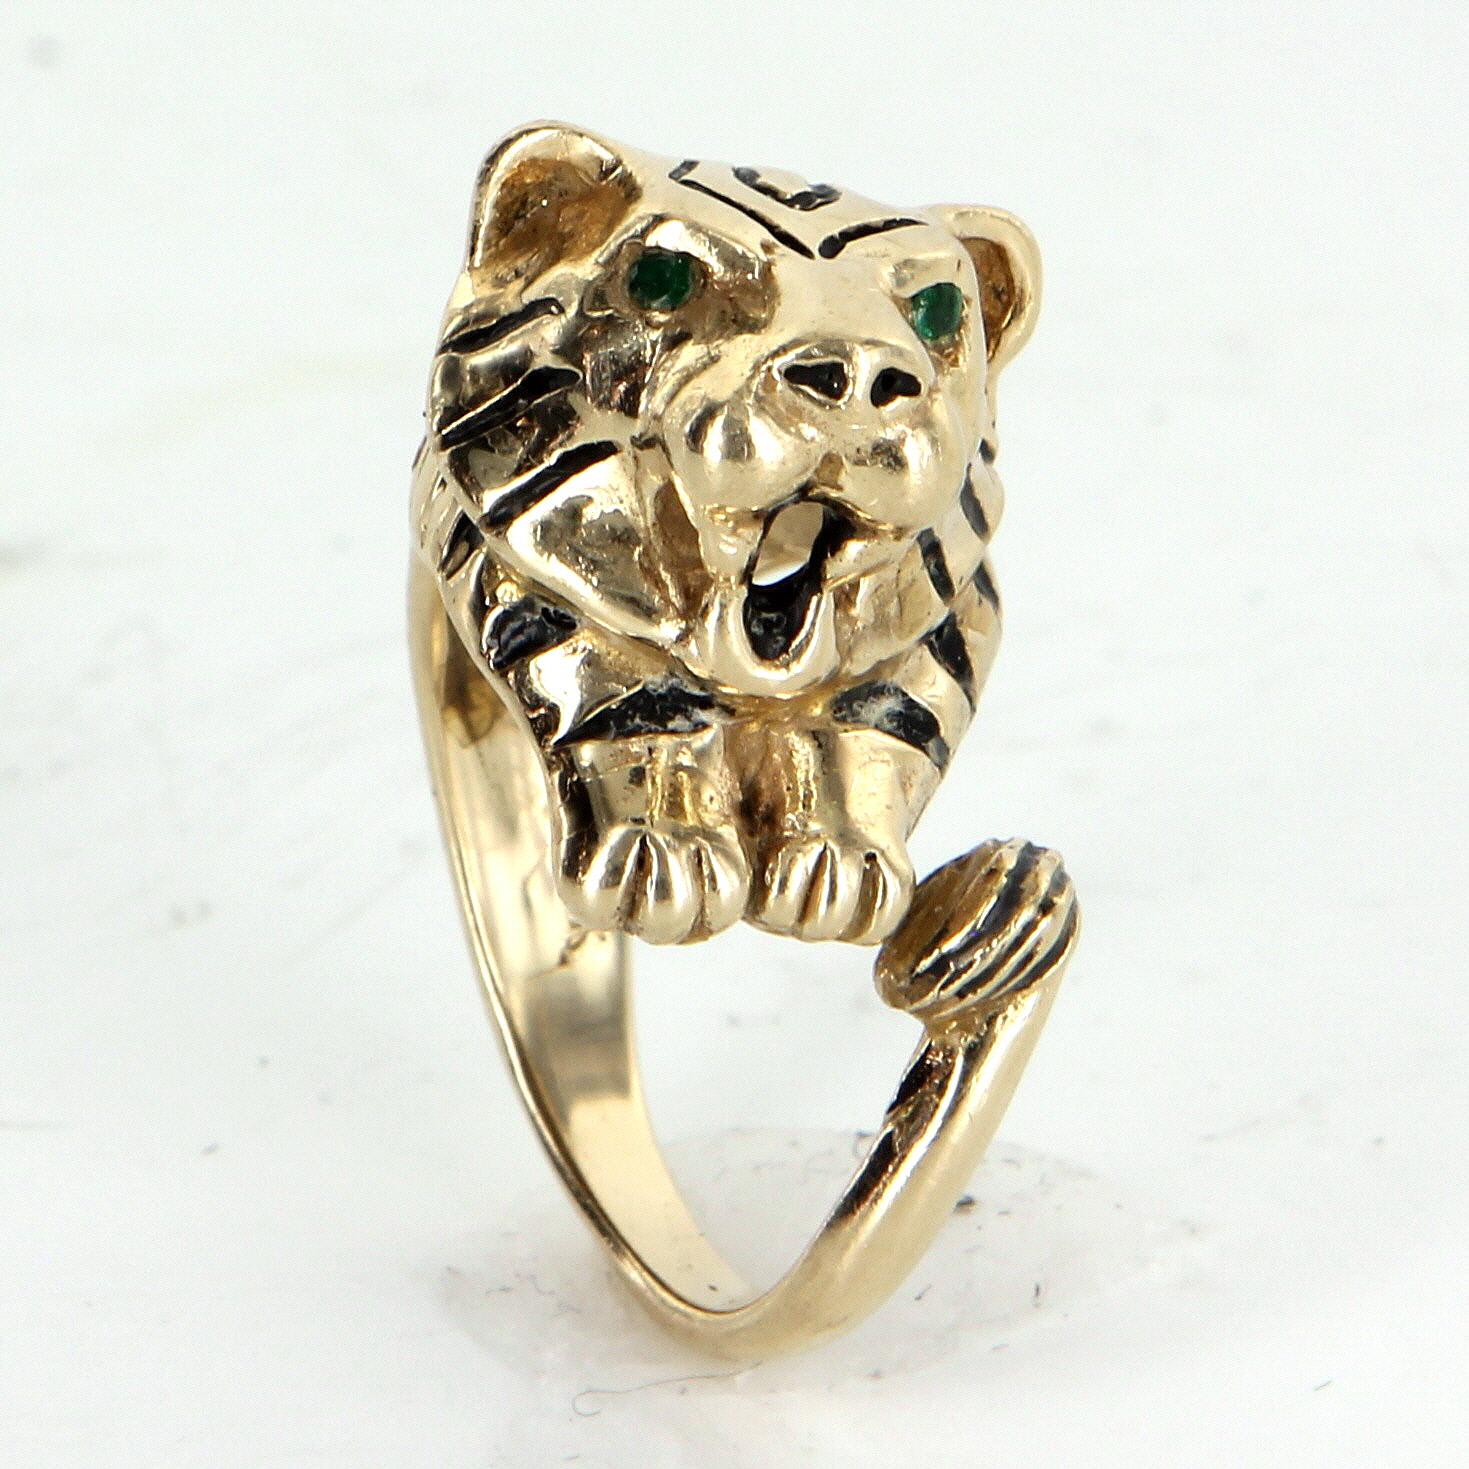 Finely detailed Bengal tiger ring, crafted in 14 karat yellow gold. 

Emeralds are set into the eyes, totaling an estimated 0.06 carats.

The ring weighs 19 grams and has a nice heavyweight feel, making a great statement on the hand. 

The ring is